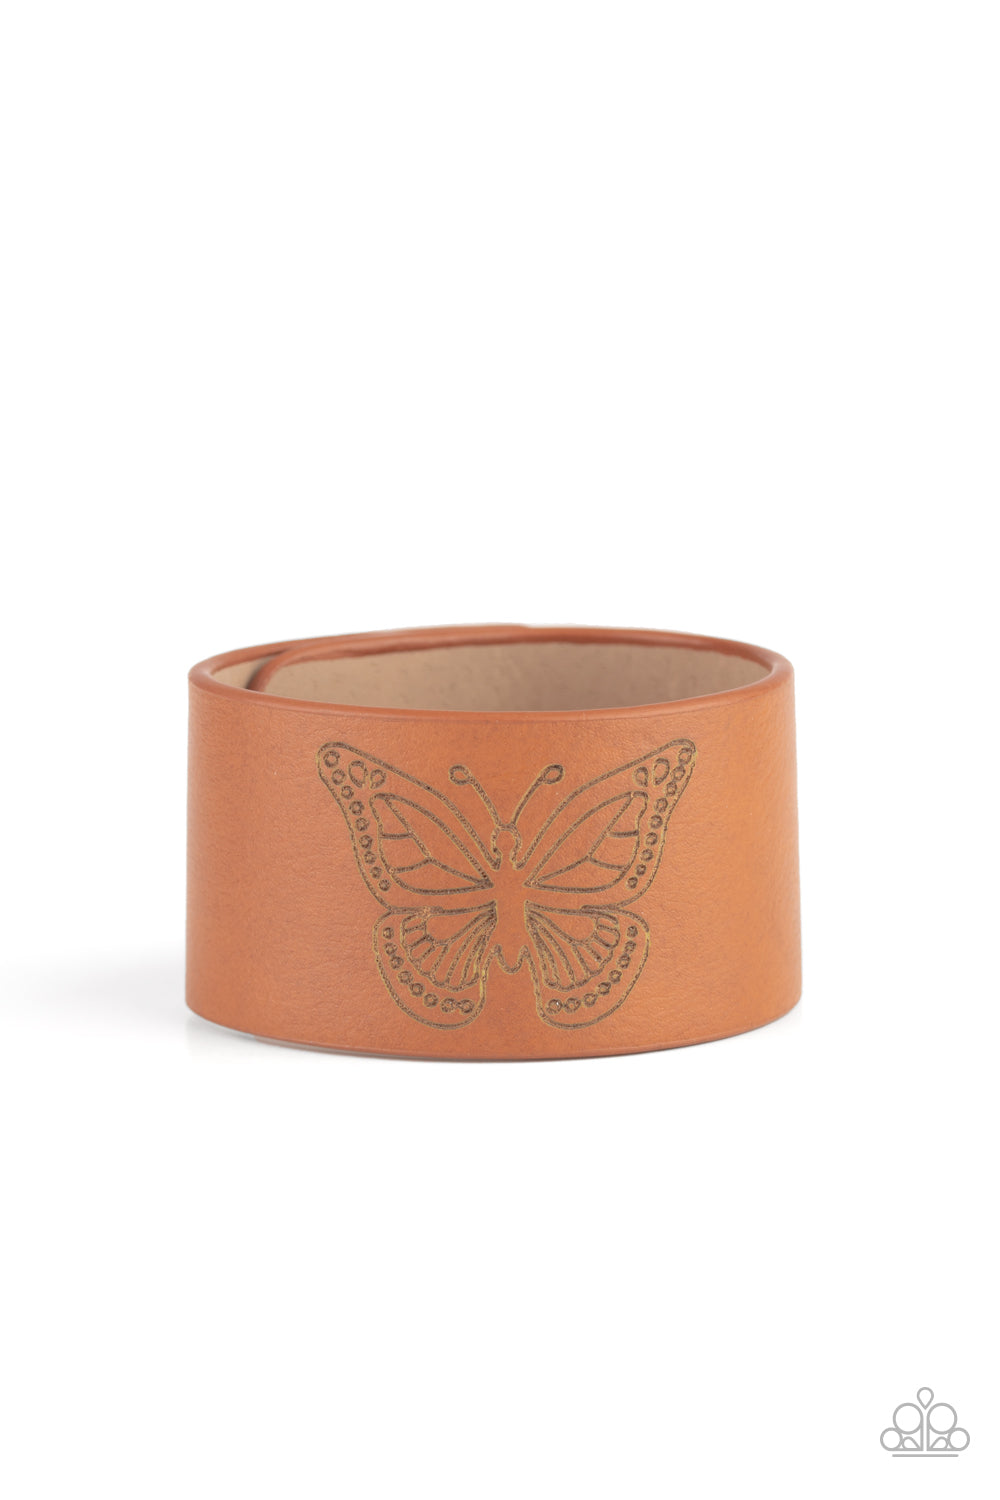 Flirty Flutter Brown Wrap Bracelet - Paparazzi Accessories Stamped in a whimsical butterfly, a rustic piece of brown leather wraps around the wrist for a seasonal flair. Features an adjustable snap closure.   All Paparazzi Accessories are lead free and nickel free!  Sold as one individual bracelet.